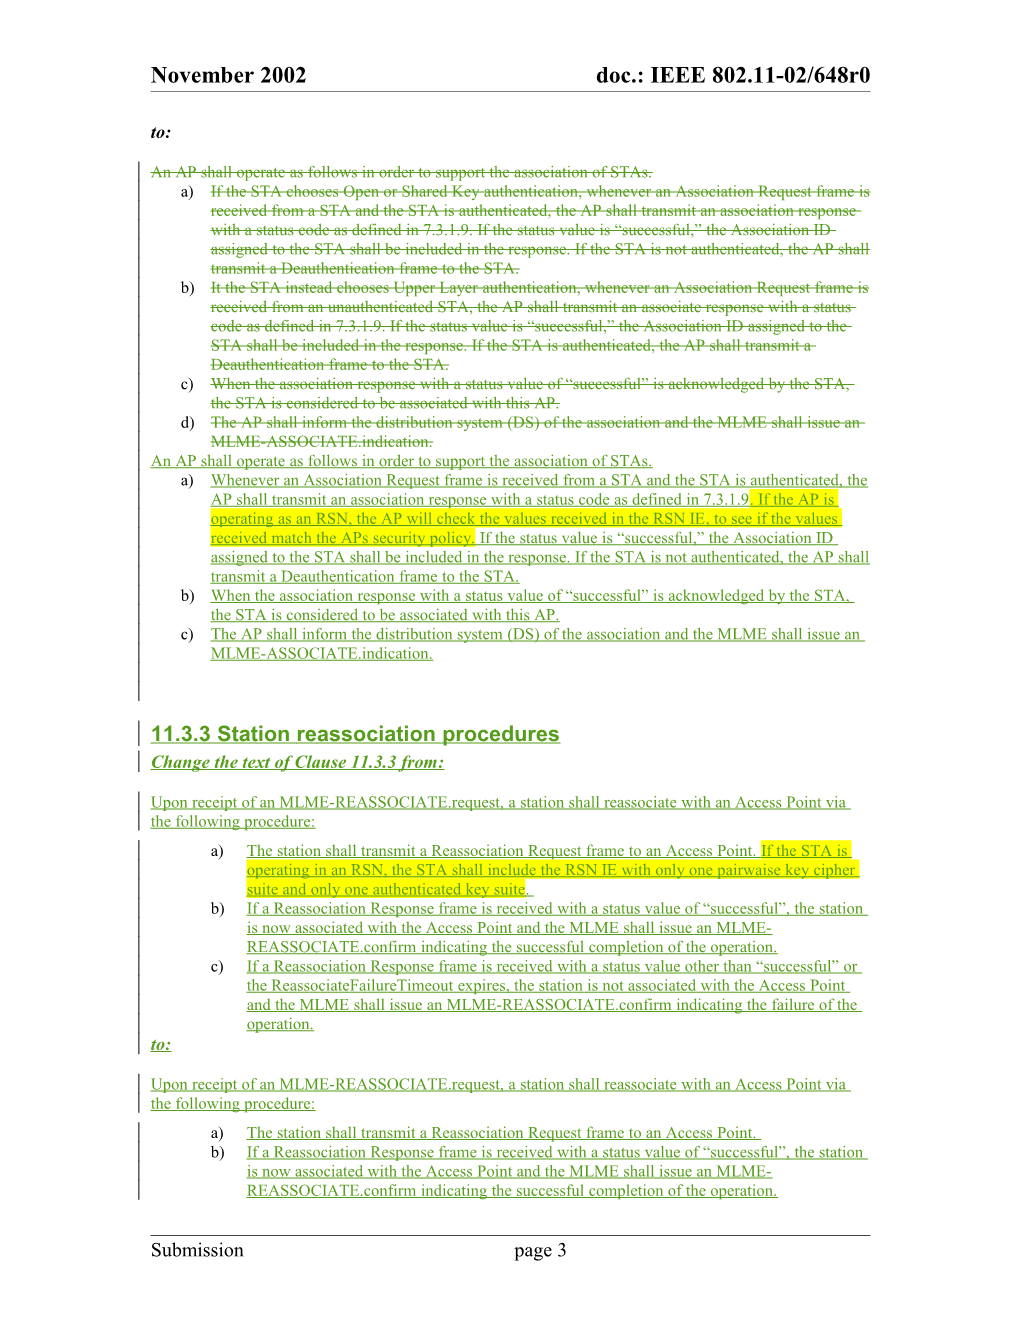 Proposed Edits to Clause 11 for 802.11I